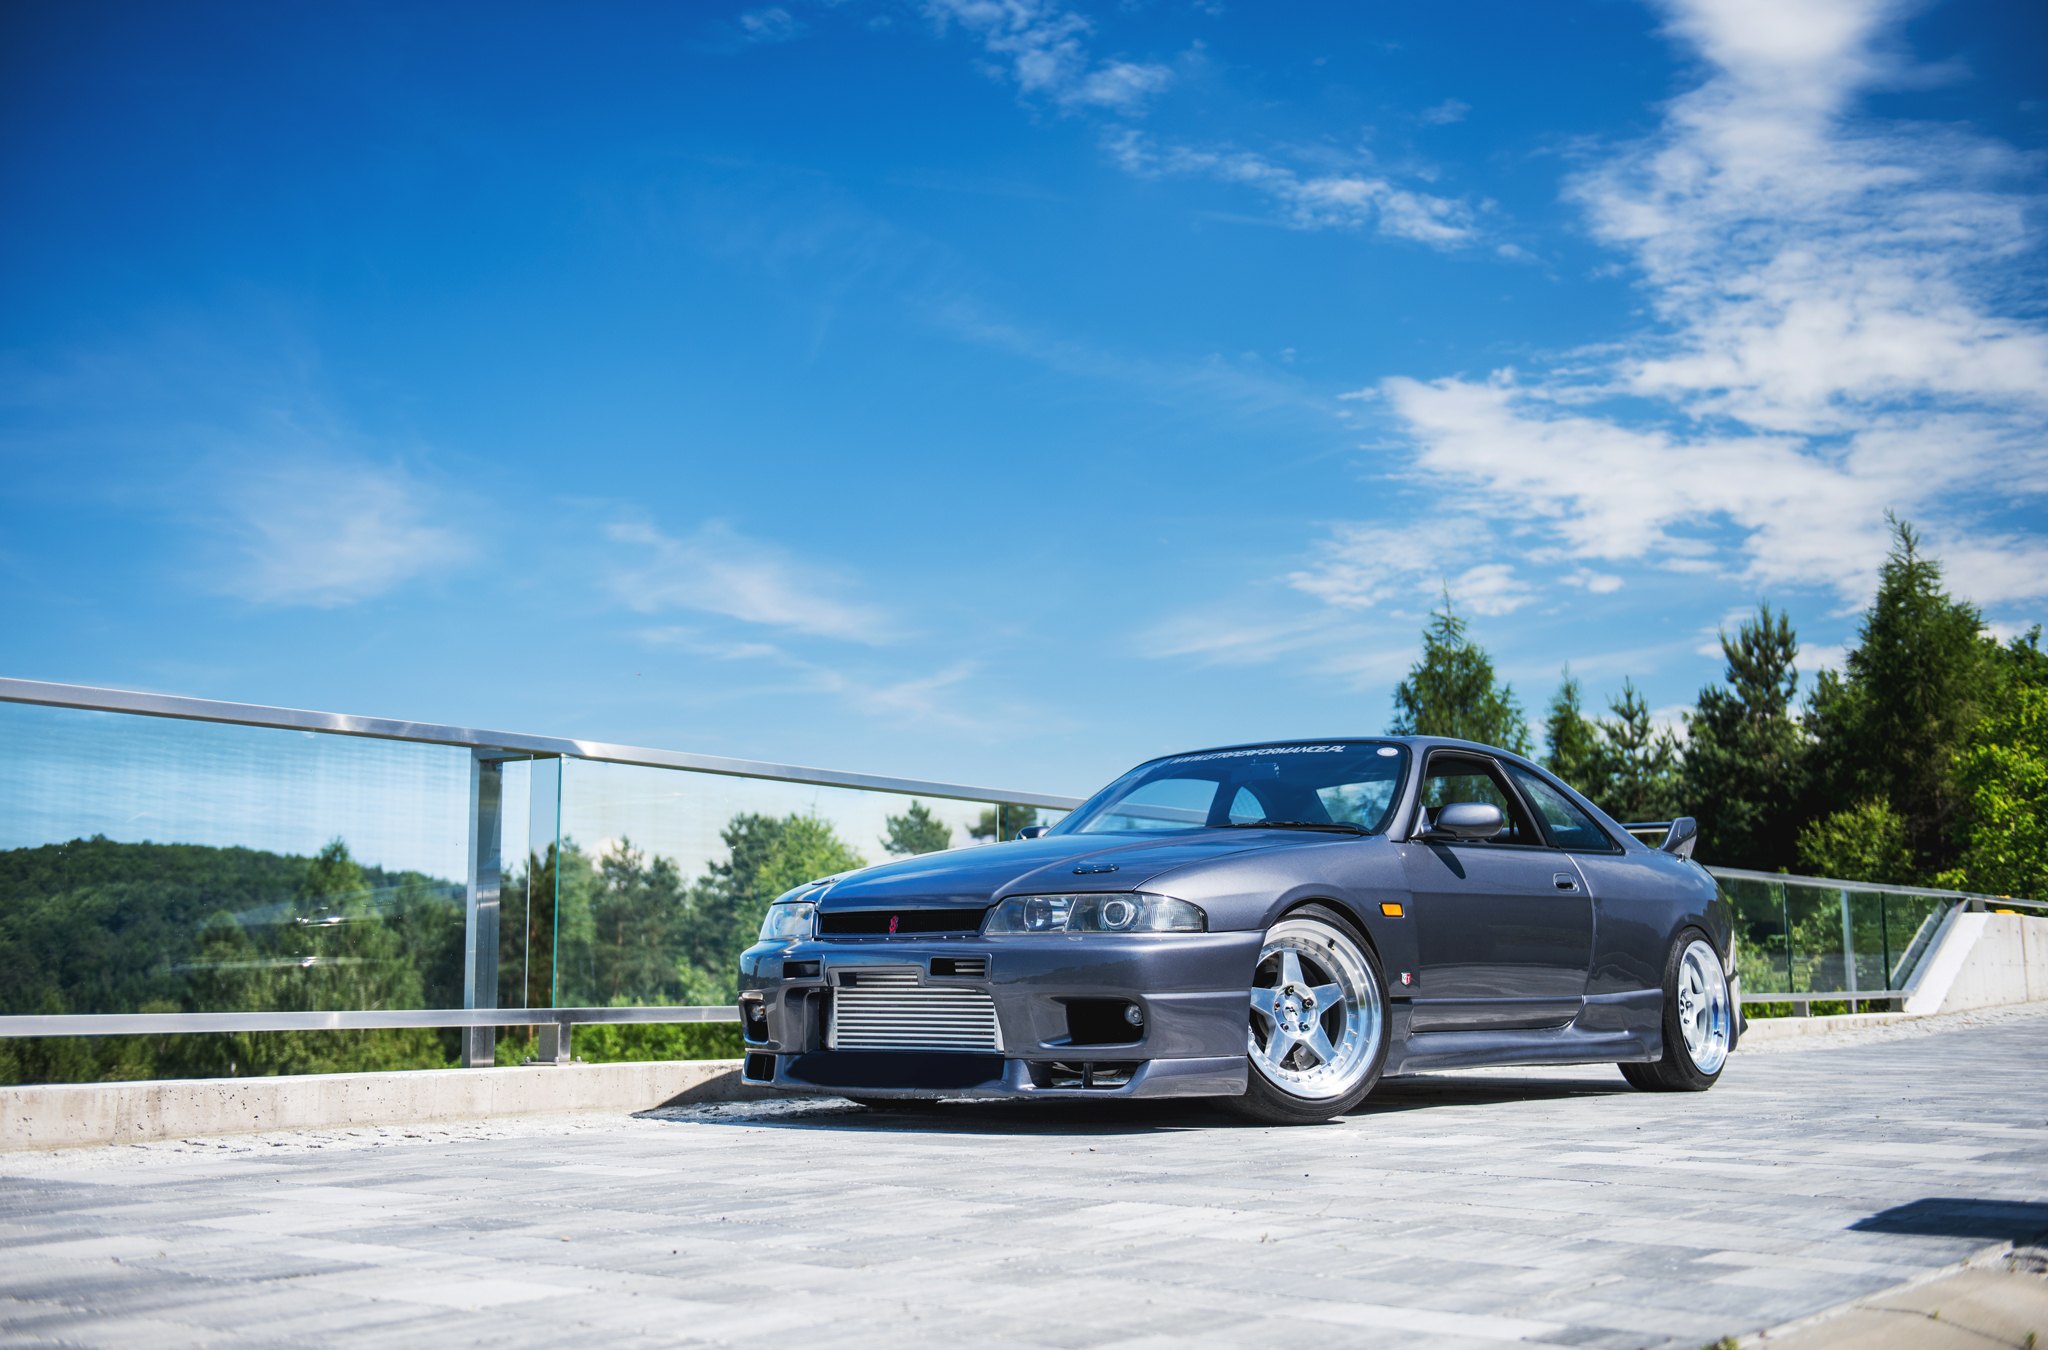 Gray Nissan Skyline with Aftermarket Front Bumper - Photo by JR Wheels